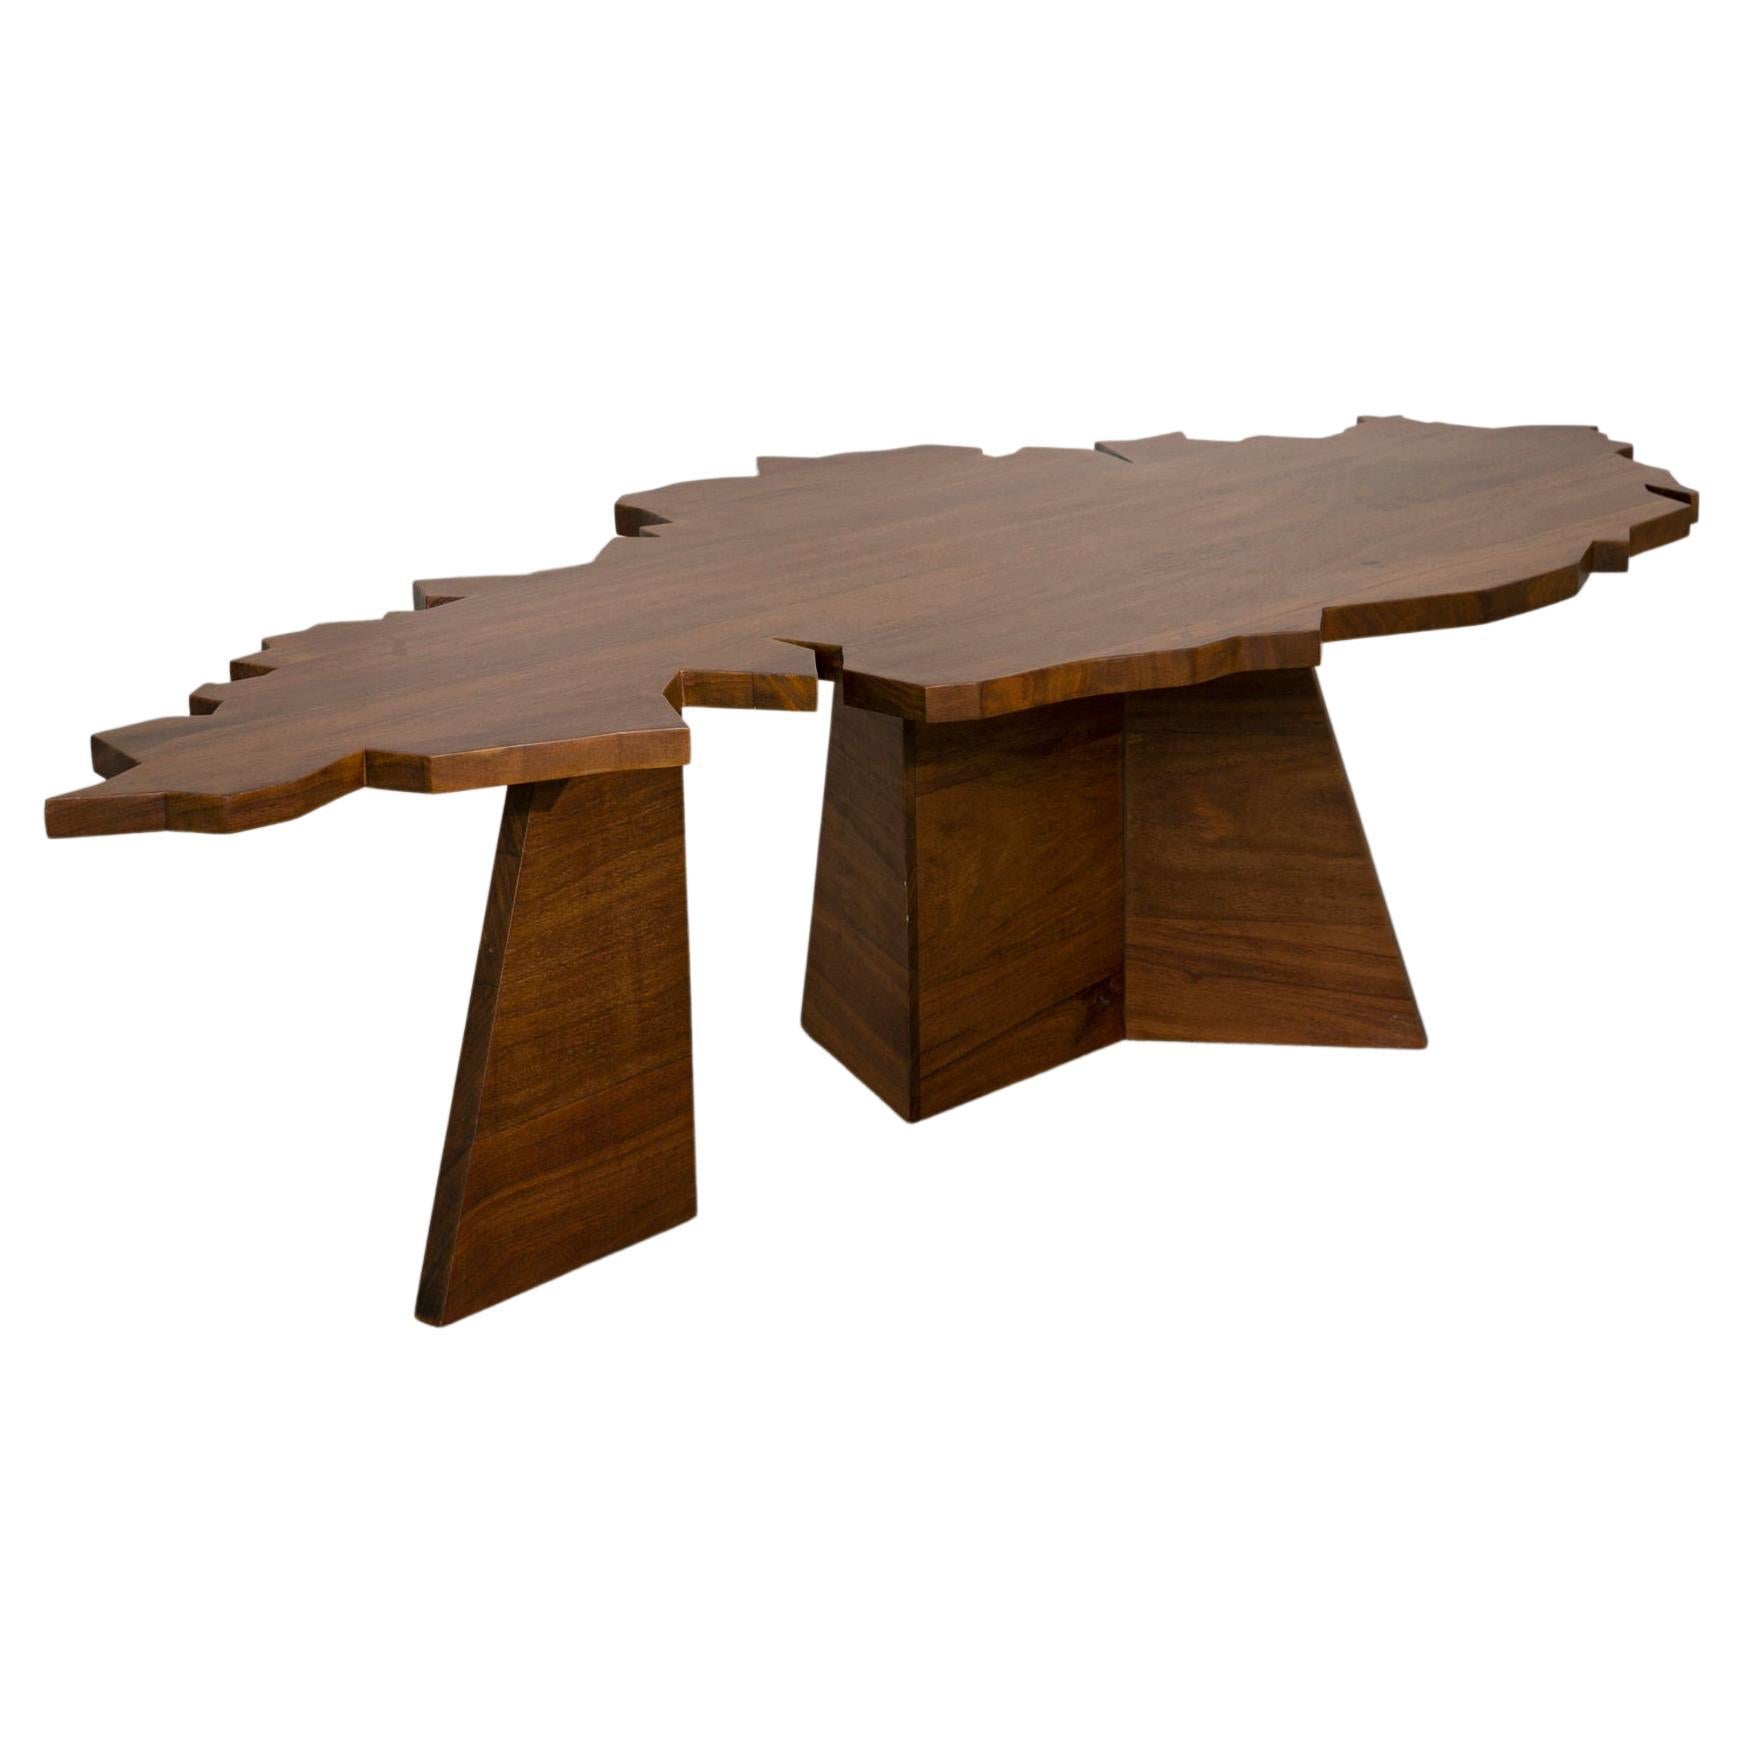 Leaf Table - Tropical Depression, Organic post-modern Coffee table in Wood.